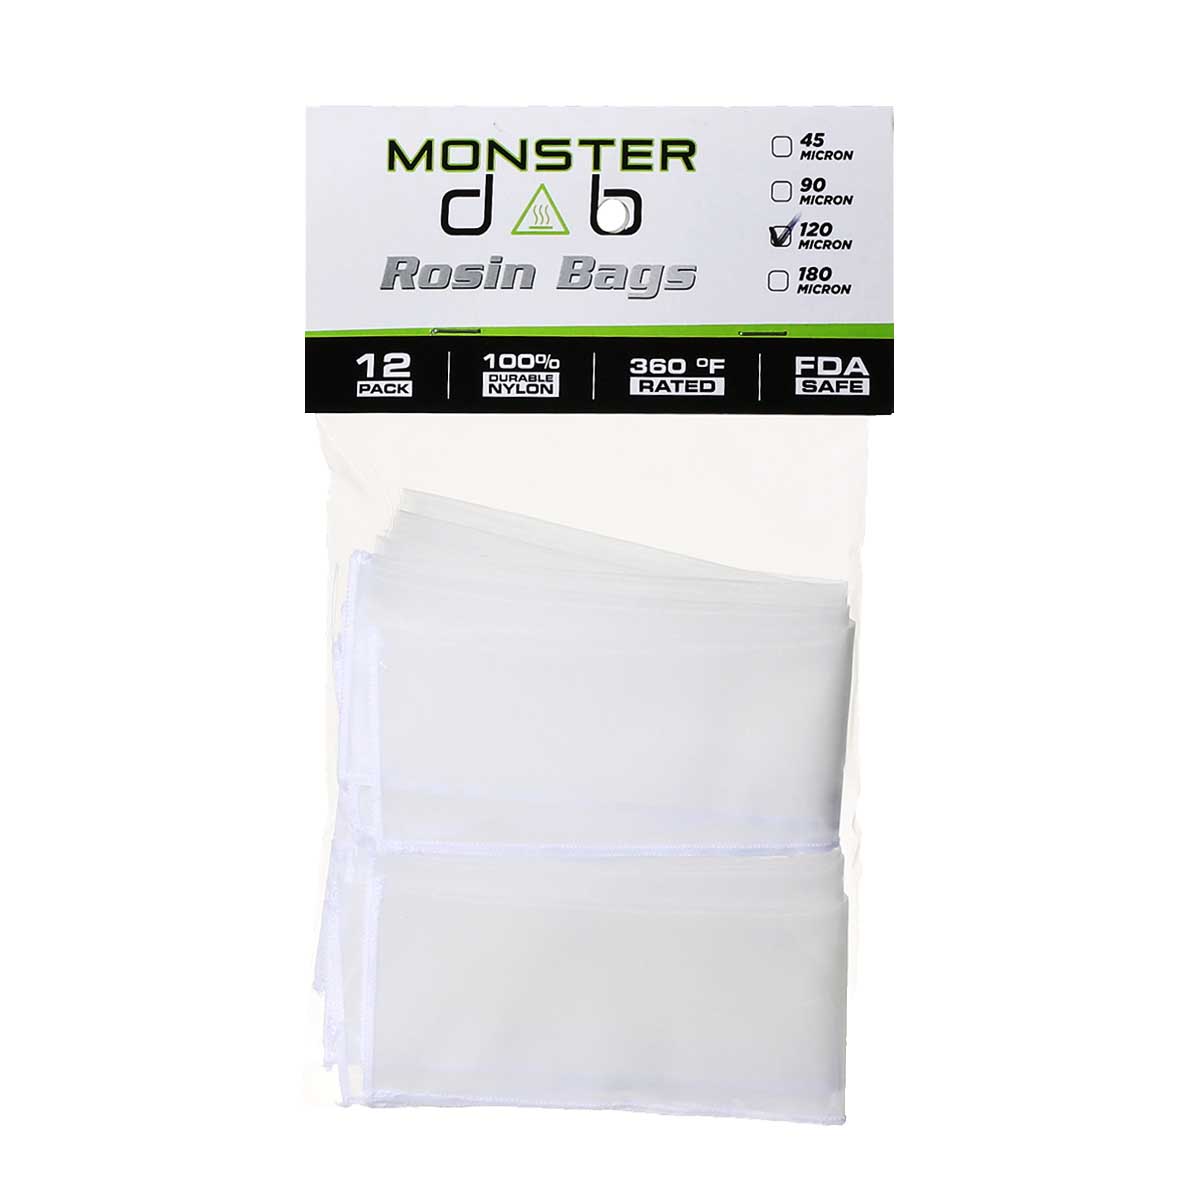 2 X 10 120 Micron Monster Dab Rosin Bag - 12 Units Extraction